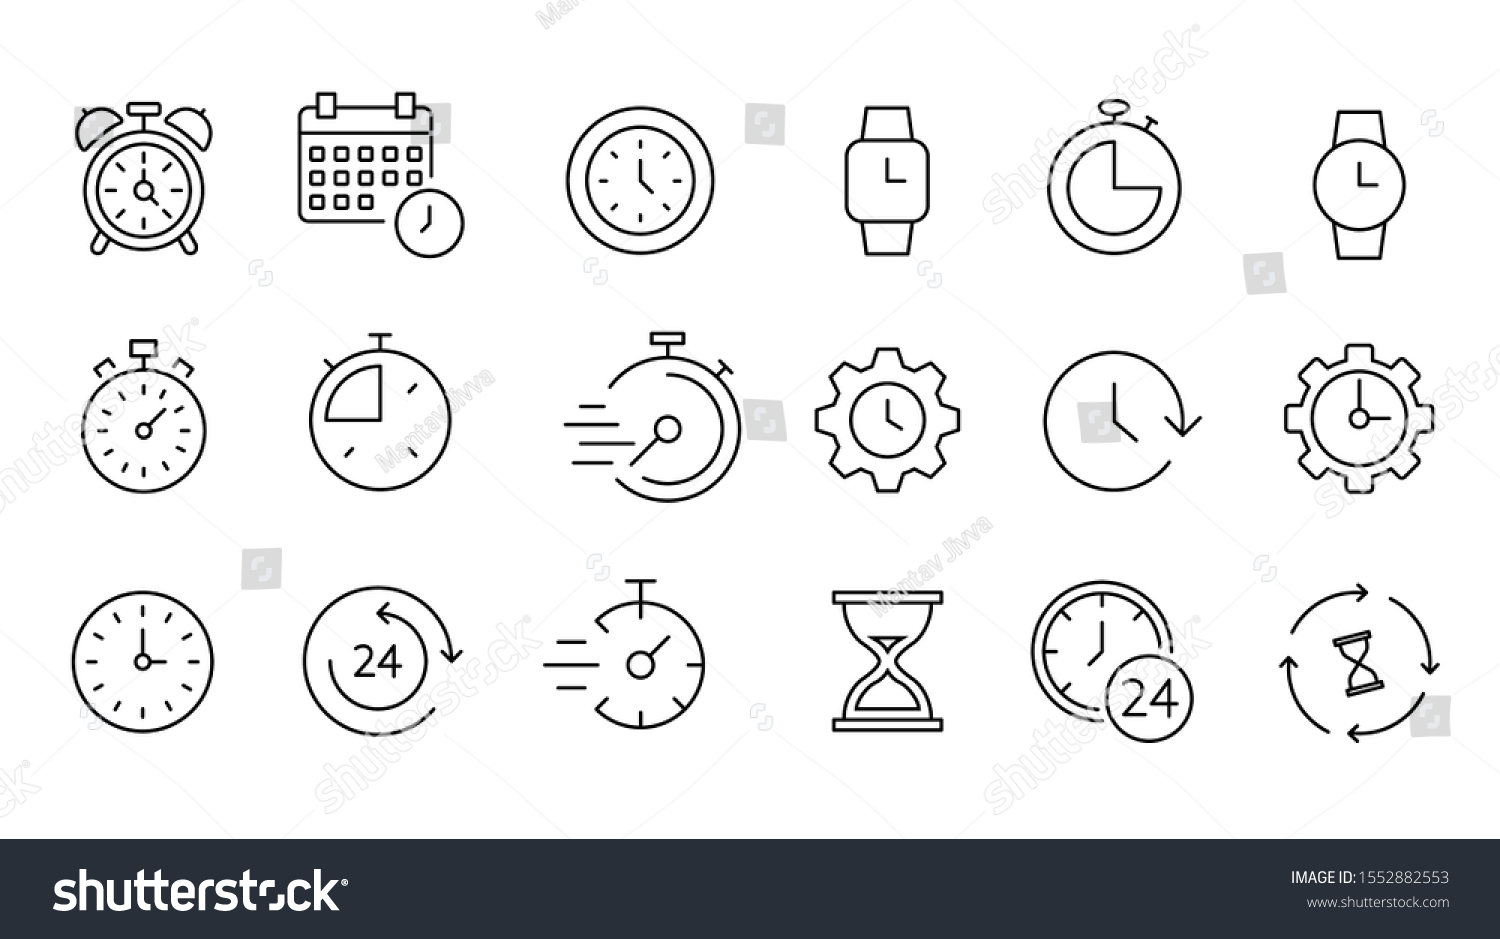 Time and clock icon set, timer, speed, alarm, restore, management, calendar, watch thin line symbols for web and mobile phone on white background - editable stroke vector illustration eps10 #1552882553